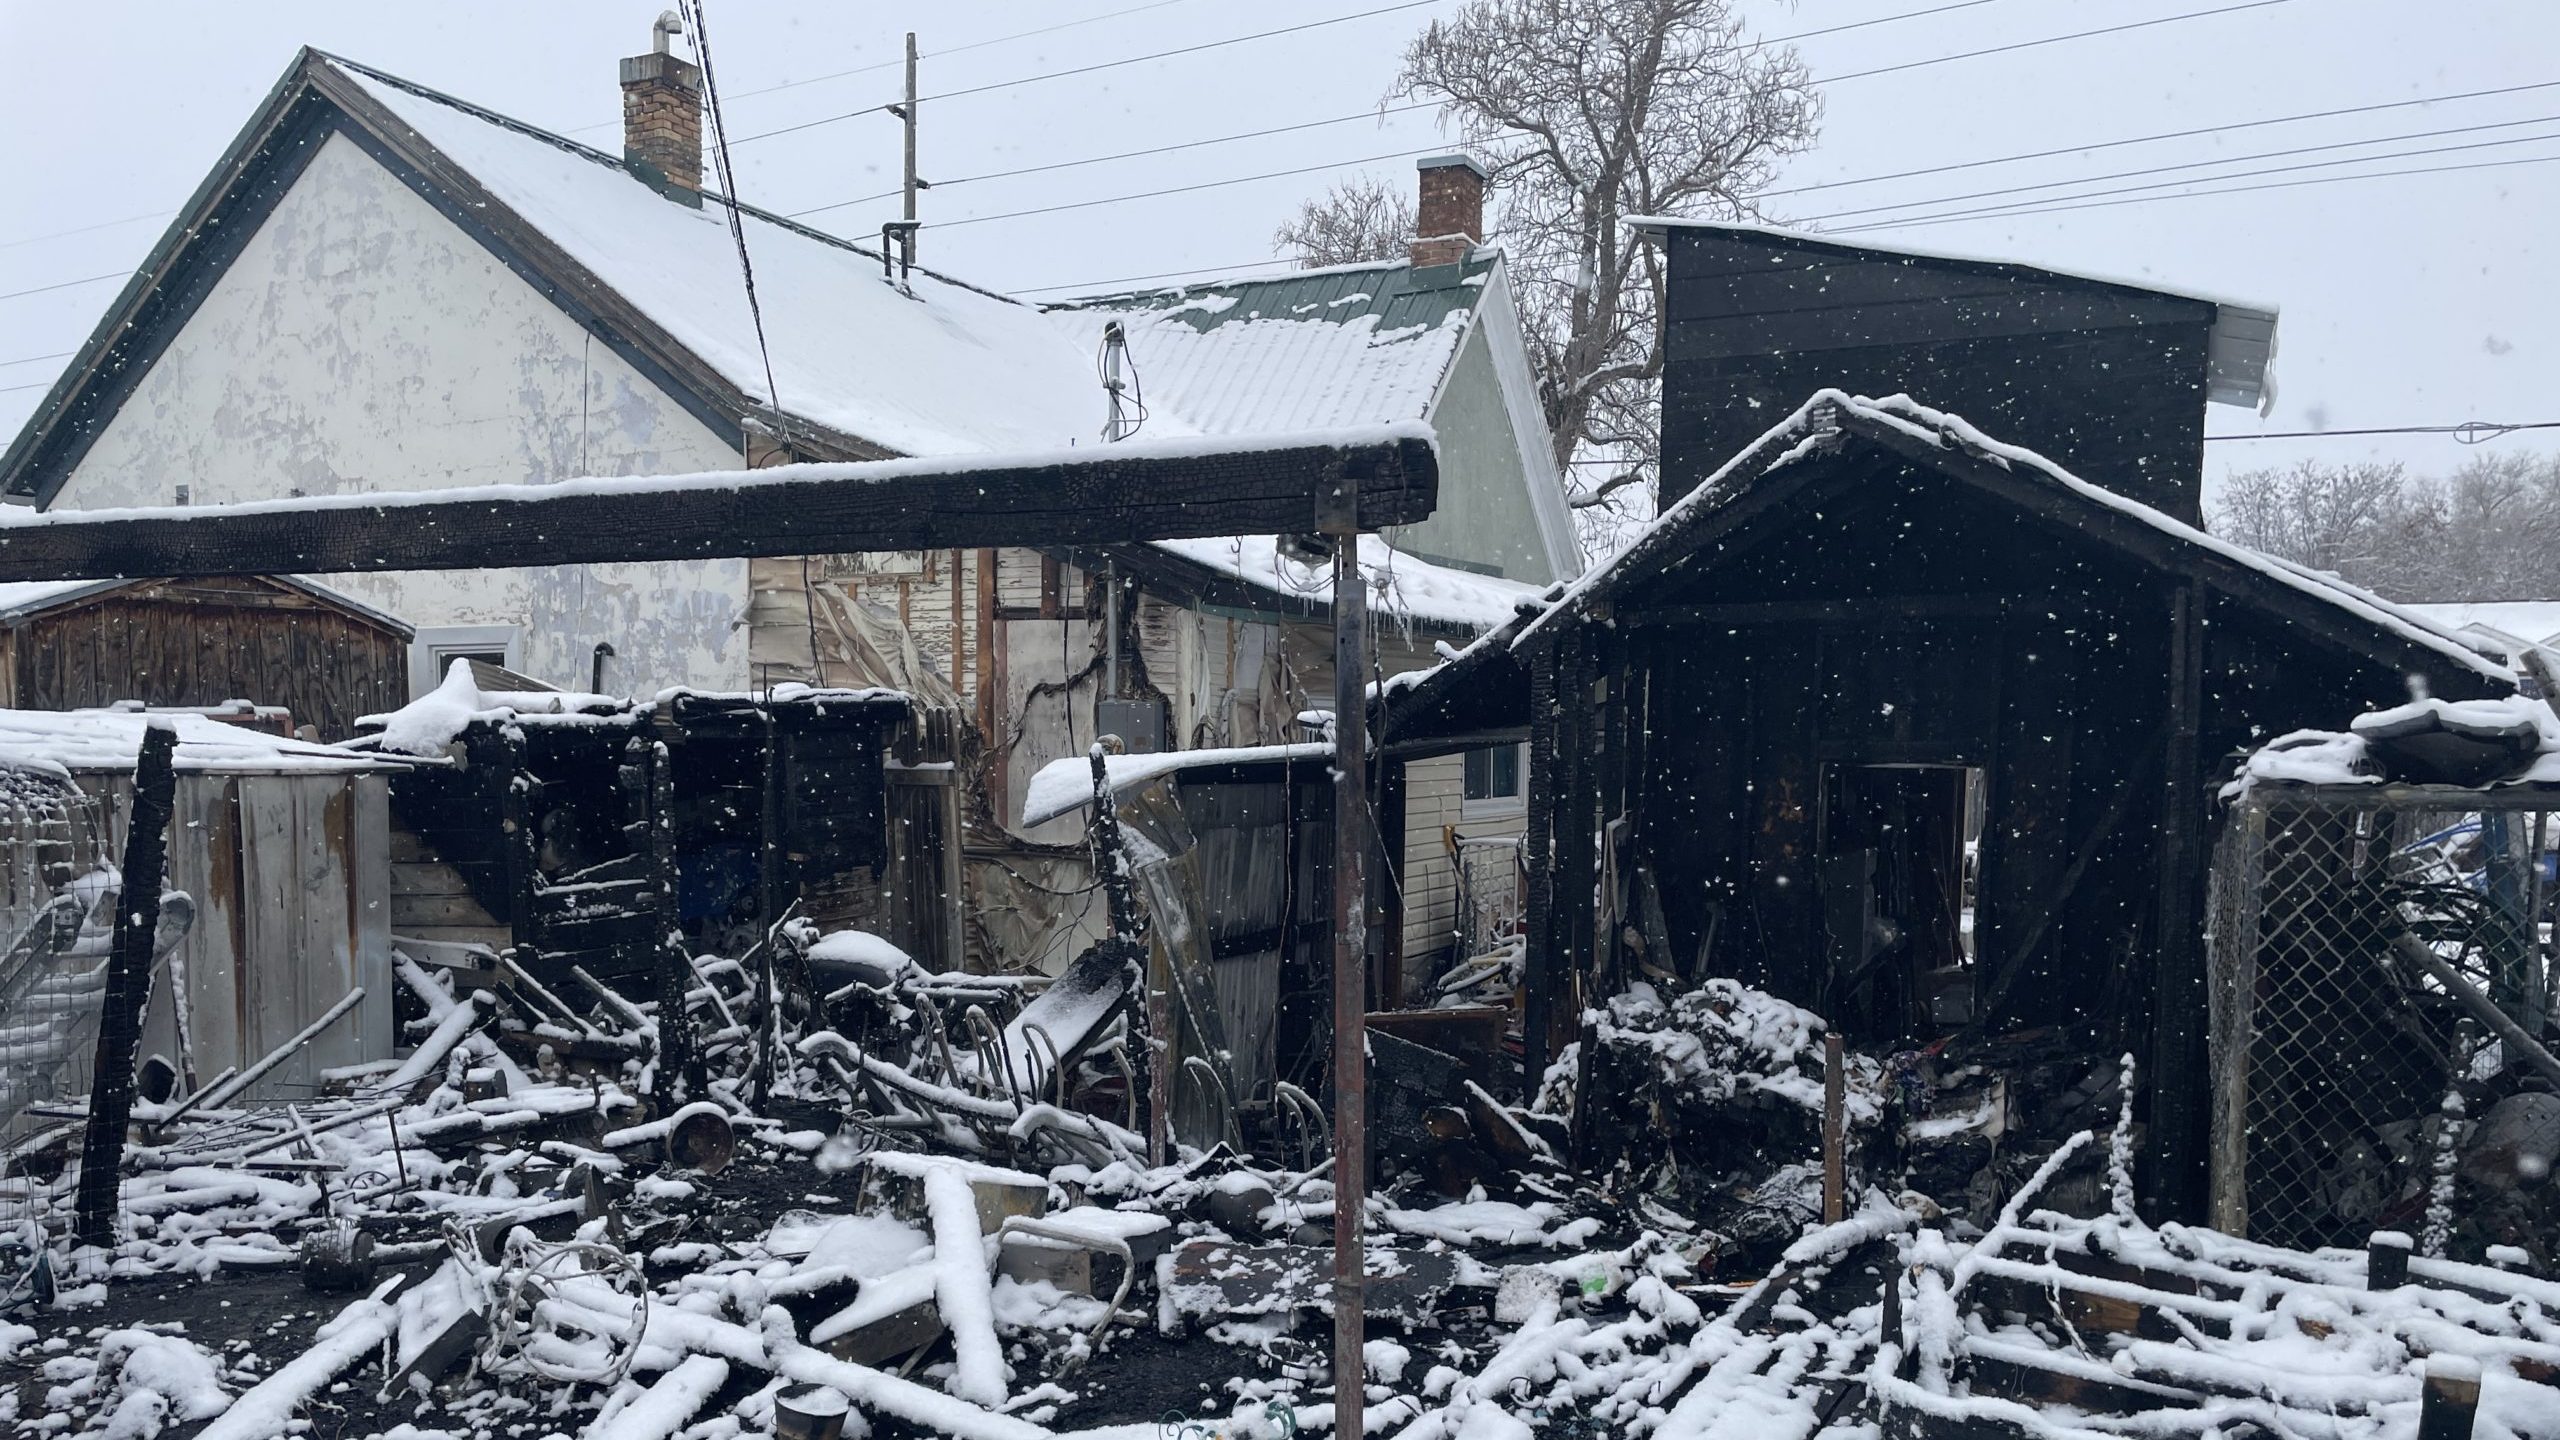 A fire fueled by propane caused $60,000 in damages to two homes in Spanish Fork on Wednesday....